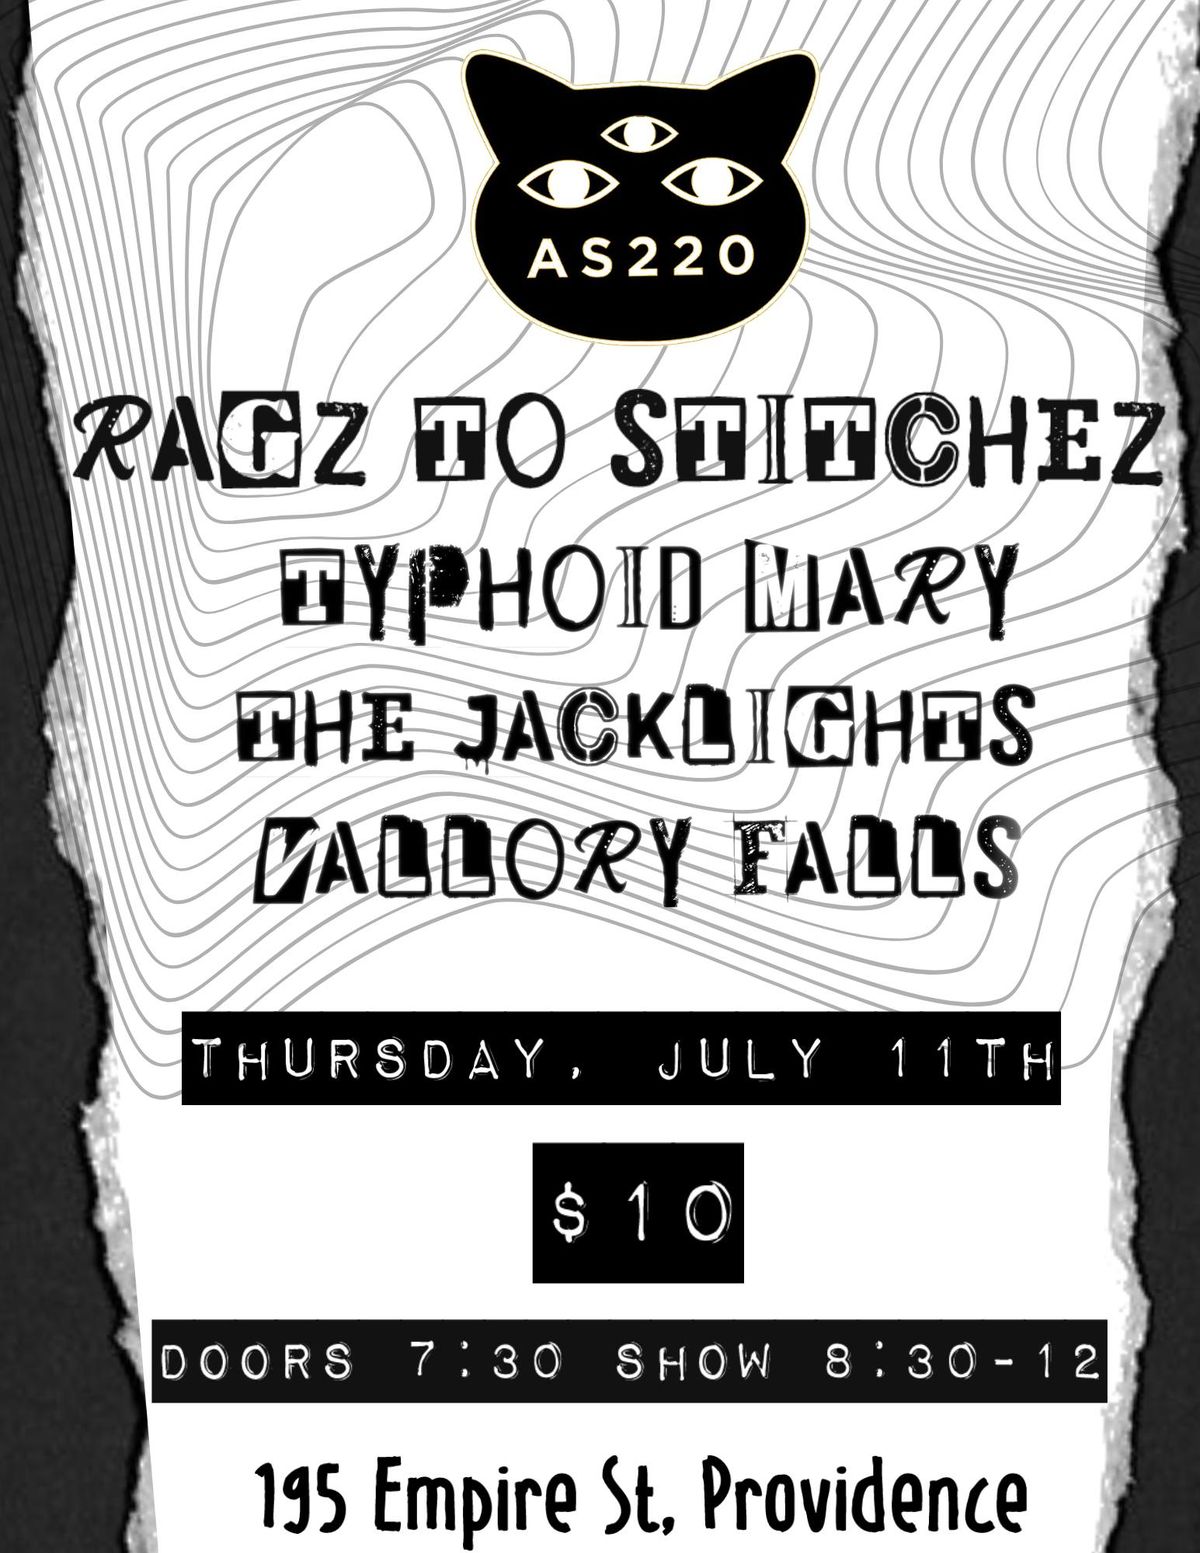 Ragz to Stitchez, Typhoid Mary, The Jacklights, and Vallory Falls at AS220!!!